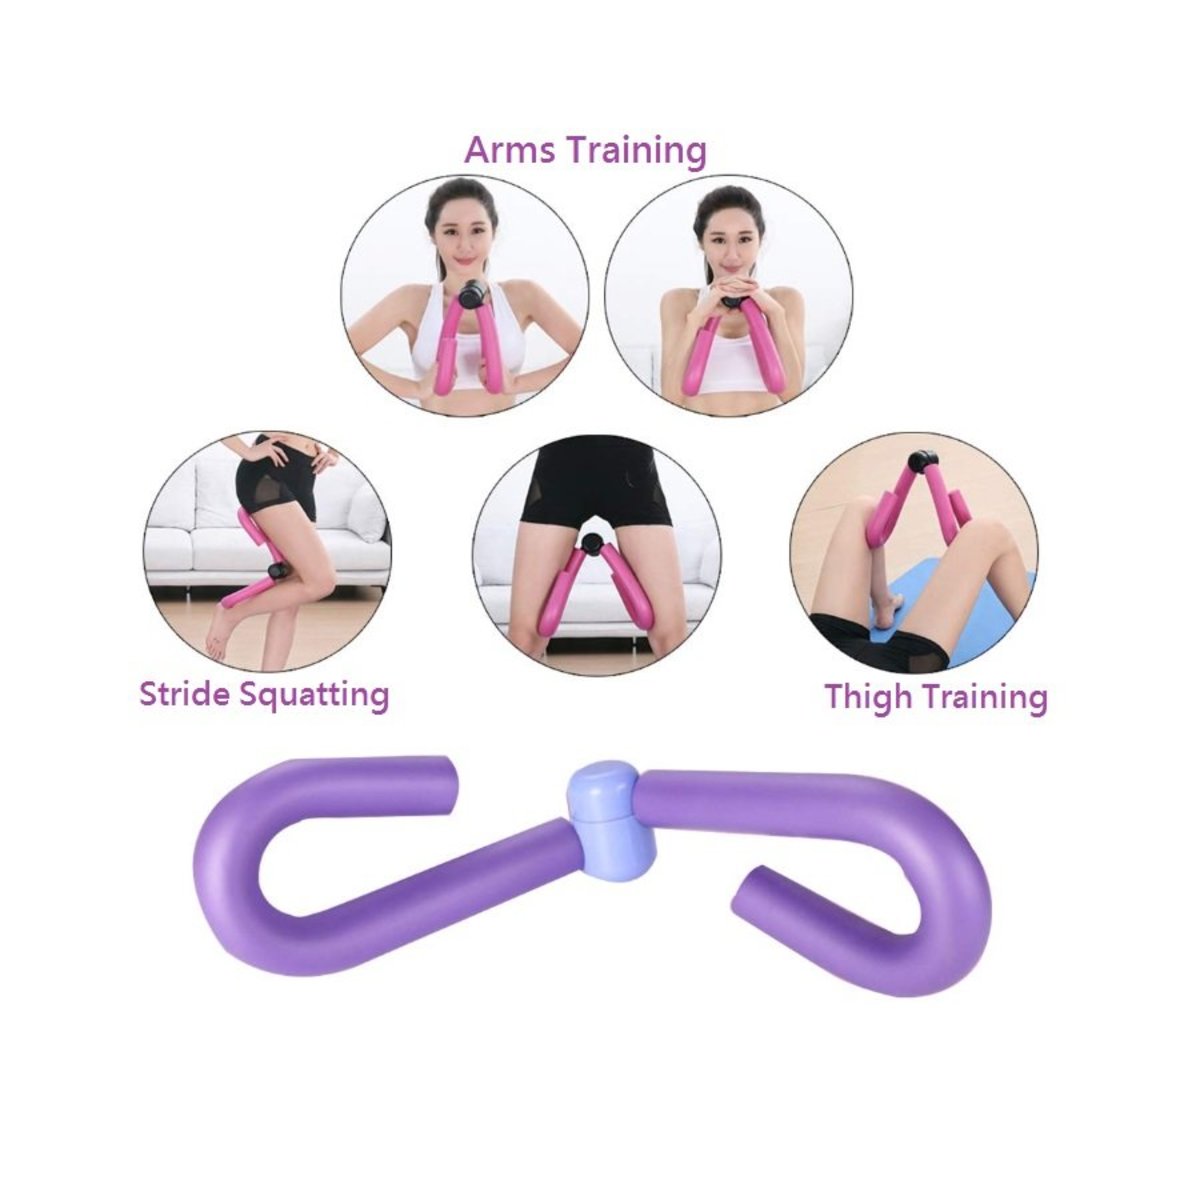 INMY Thigh Master Muscle Fitness Equipment Bodybuilding Expander Arm Workout Leg Exercise,Trimmer Inner Thigh,Toning Arm Leg Exerciser for Home Gym Yoga Sport Slimming Training 